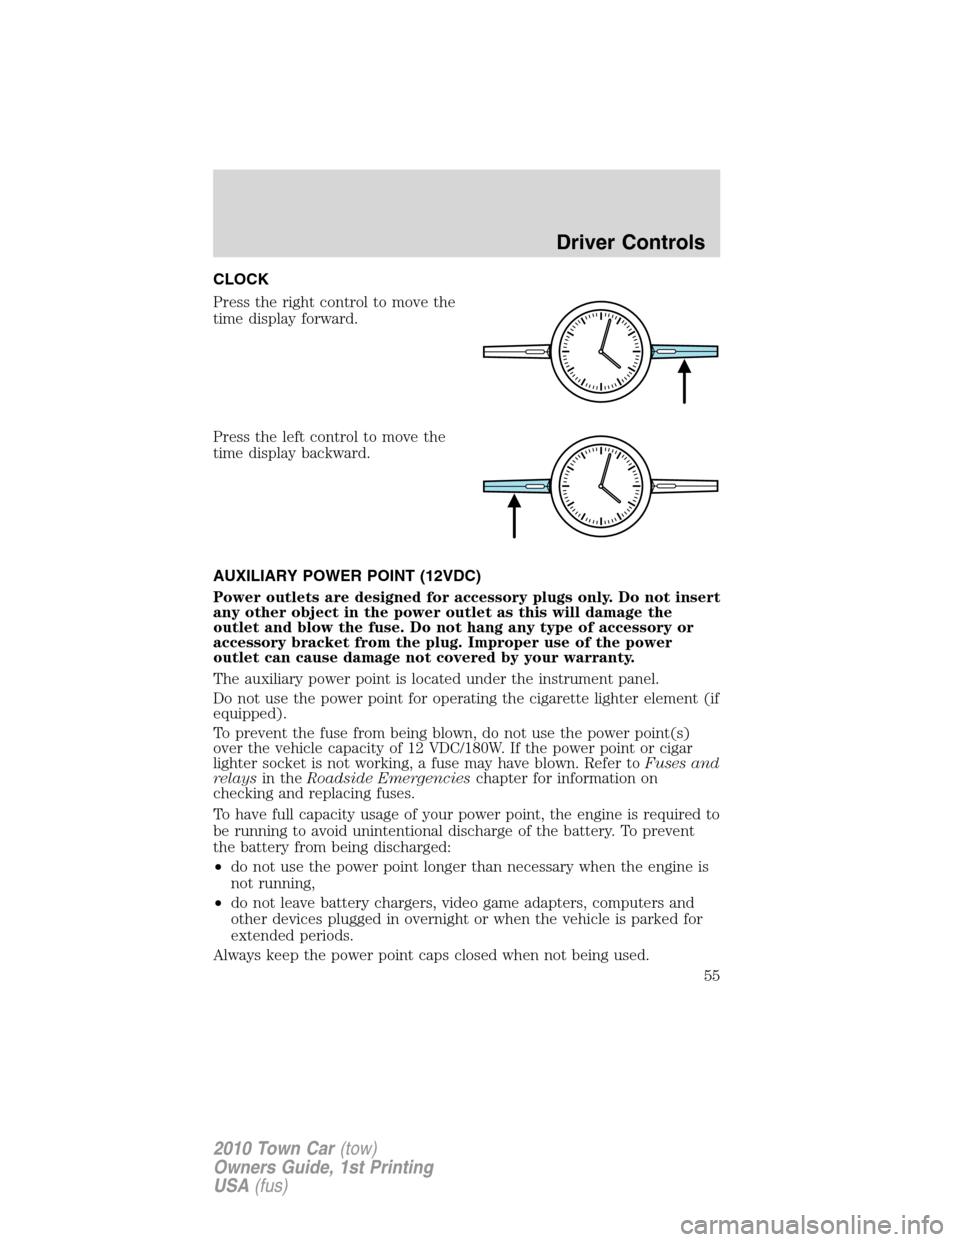 LINCOLN TOWN CAR 2010 Workshop Manual CLOCK
Press the right control to move the
time display forward.
Press the left control to move the
time display backward.
AUXILIARY POWER POINT (12VDC)
Power outlets are designed for accessory plugs o